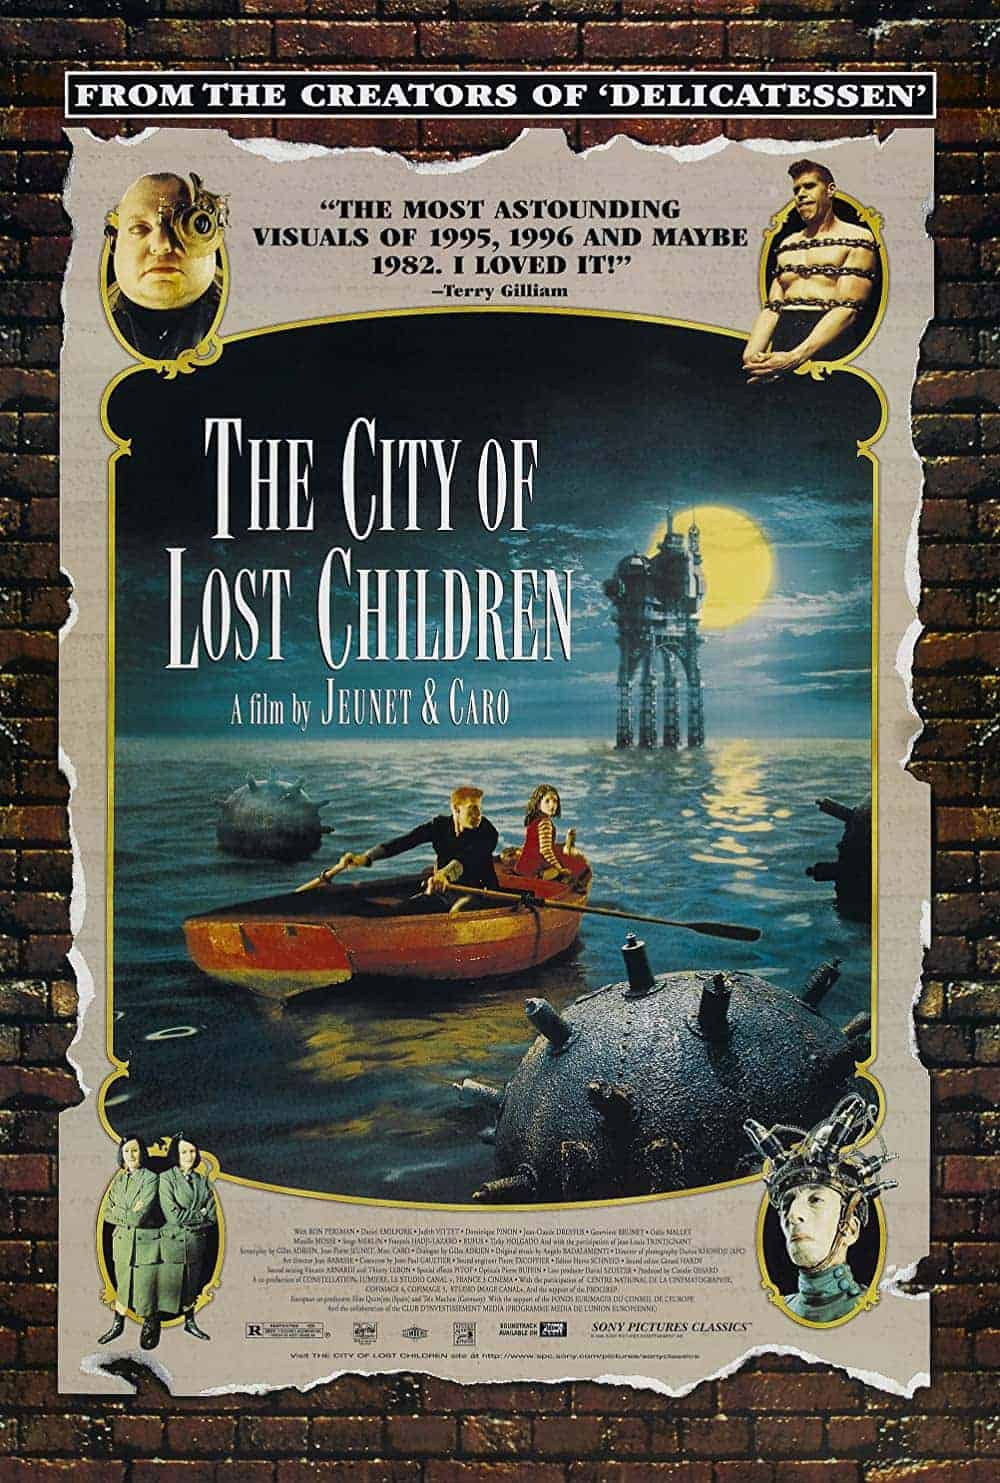 The City of Lost Children (1995) 15 Best Steampunk Movies to Check Out